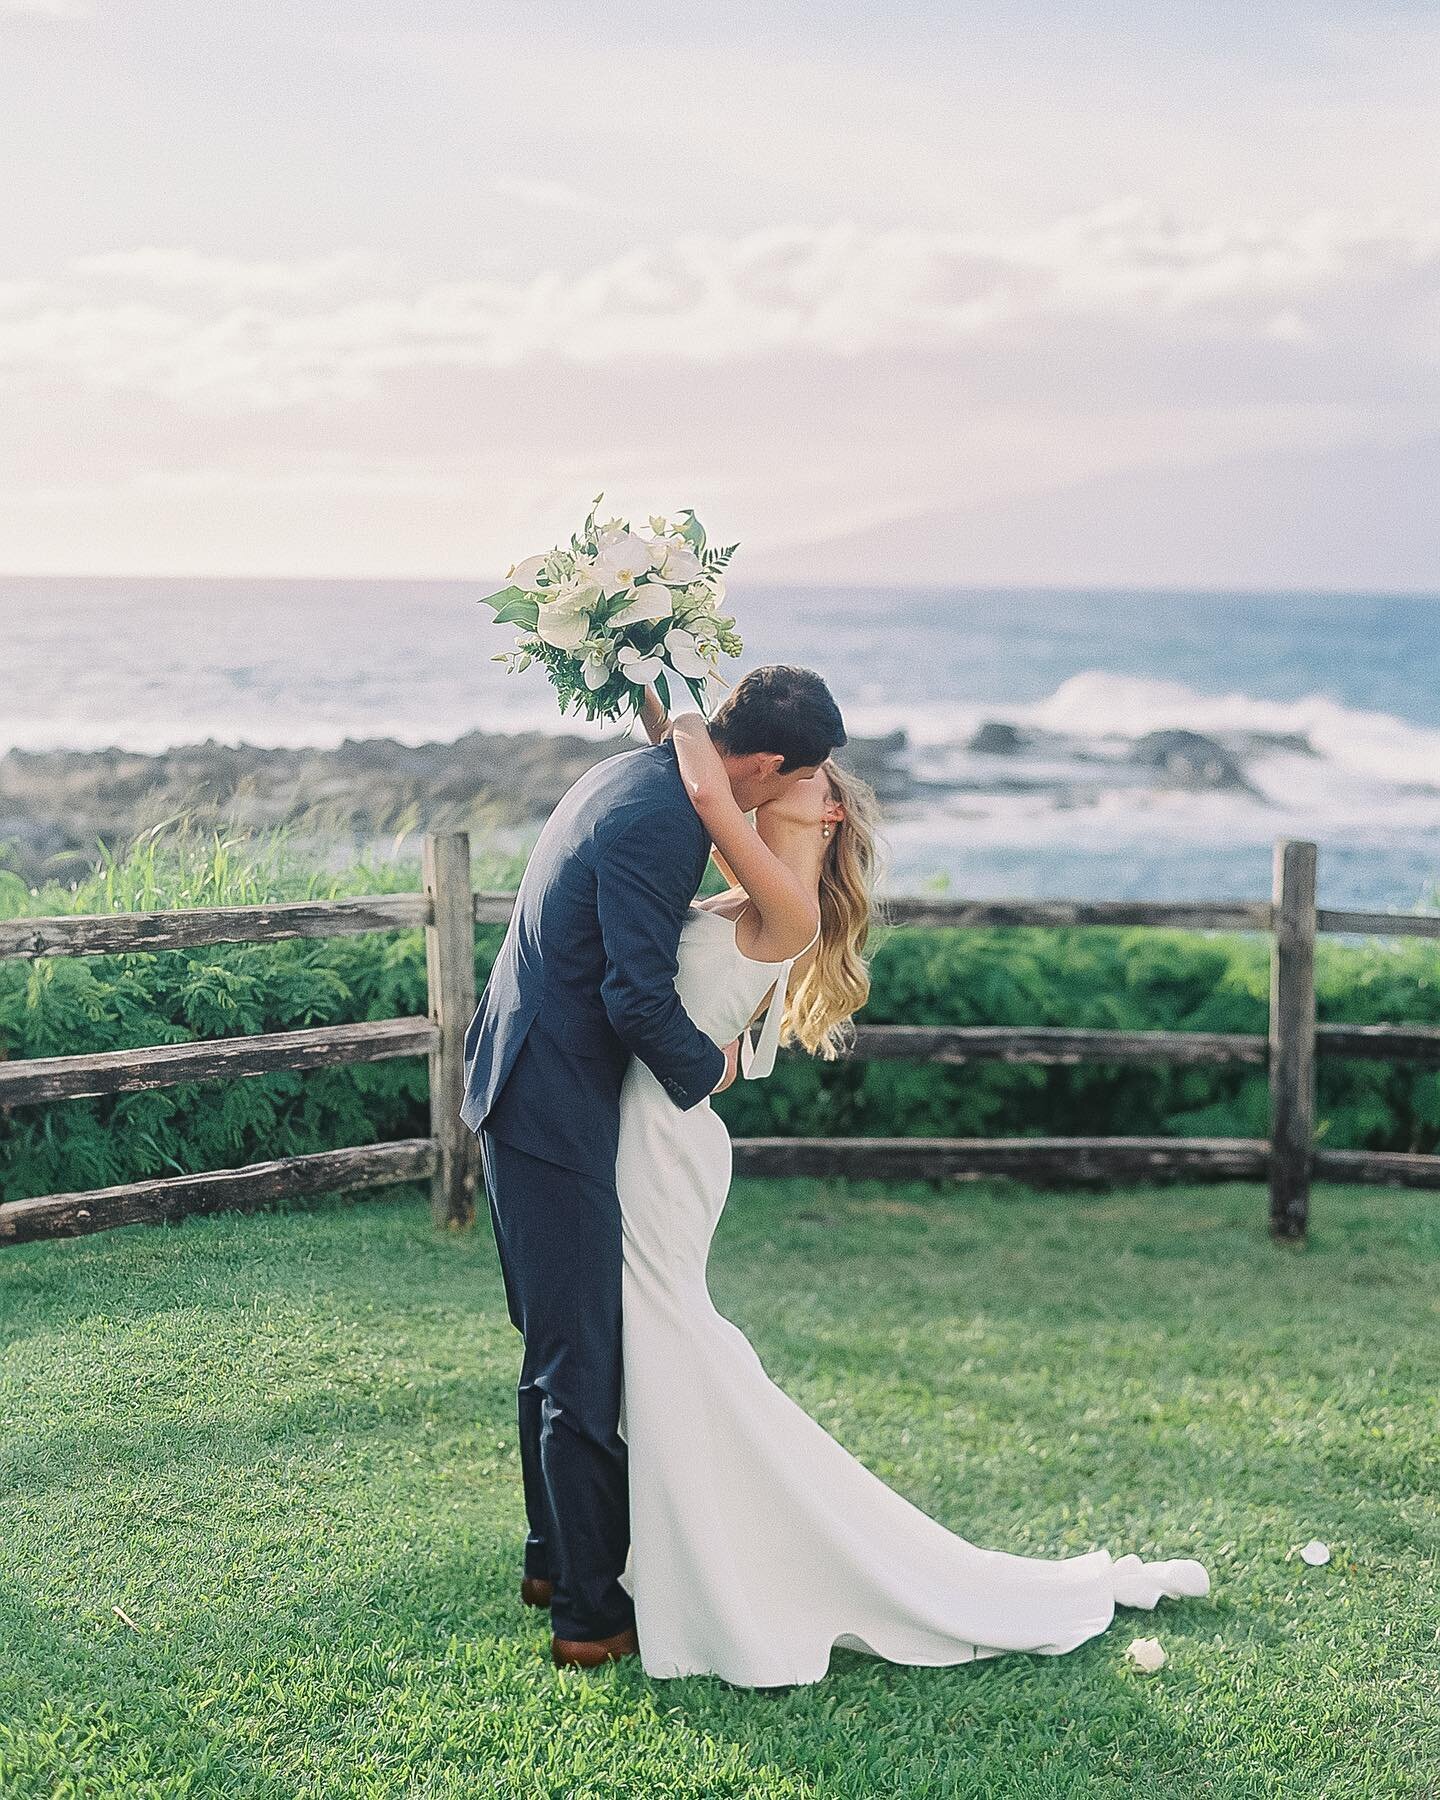 A sweet seaside moment from Emma &amp; Connor&rsquo;s wedding day at the Montage Kapalua Bay 🕊️

Planning &amp; Coordination @whiteorchidwedding 
Photography @dmitriandsandra 
Florals @dellablesfloraldesign 
Beauty @mauimakeupartistry 
Gown @leaannb